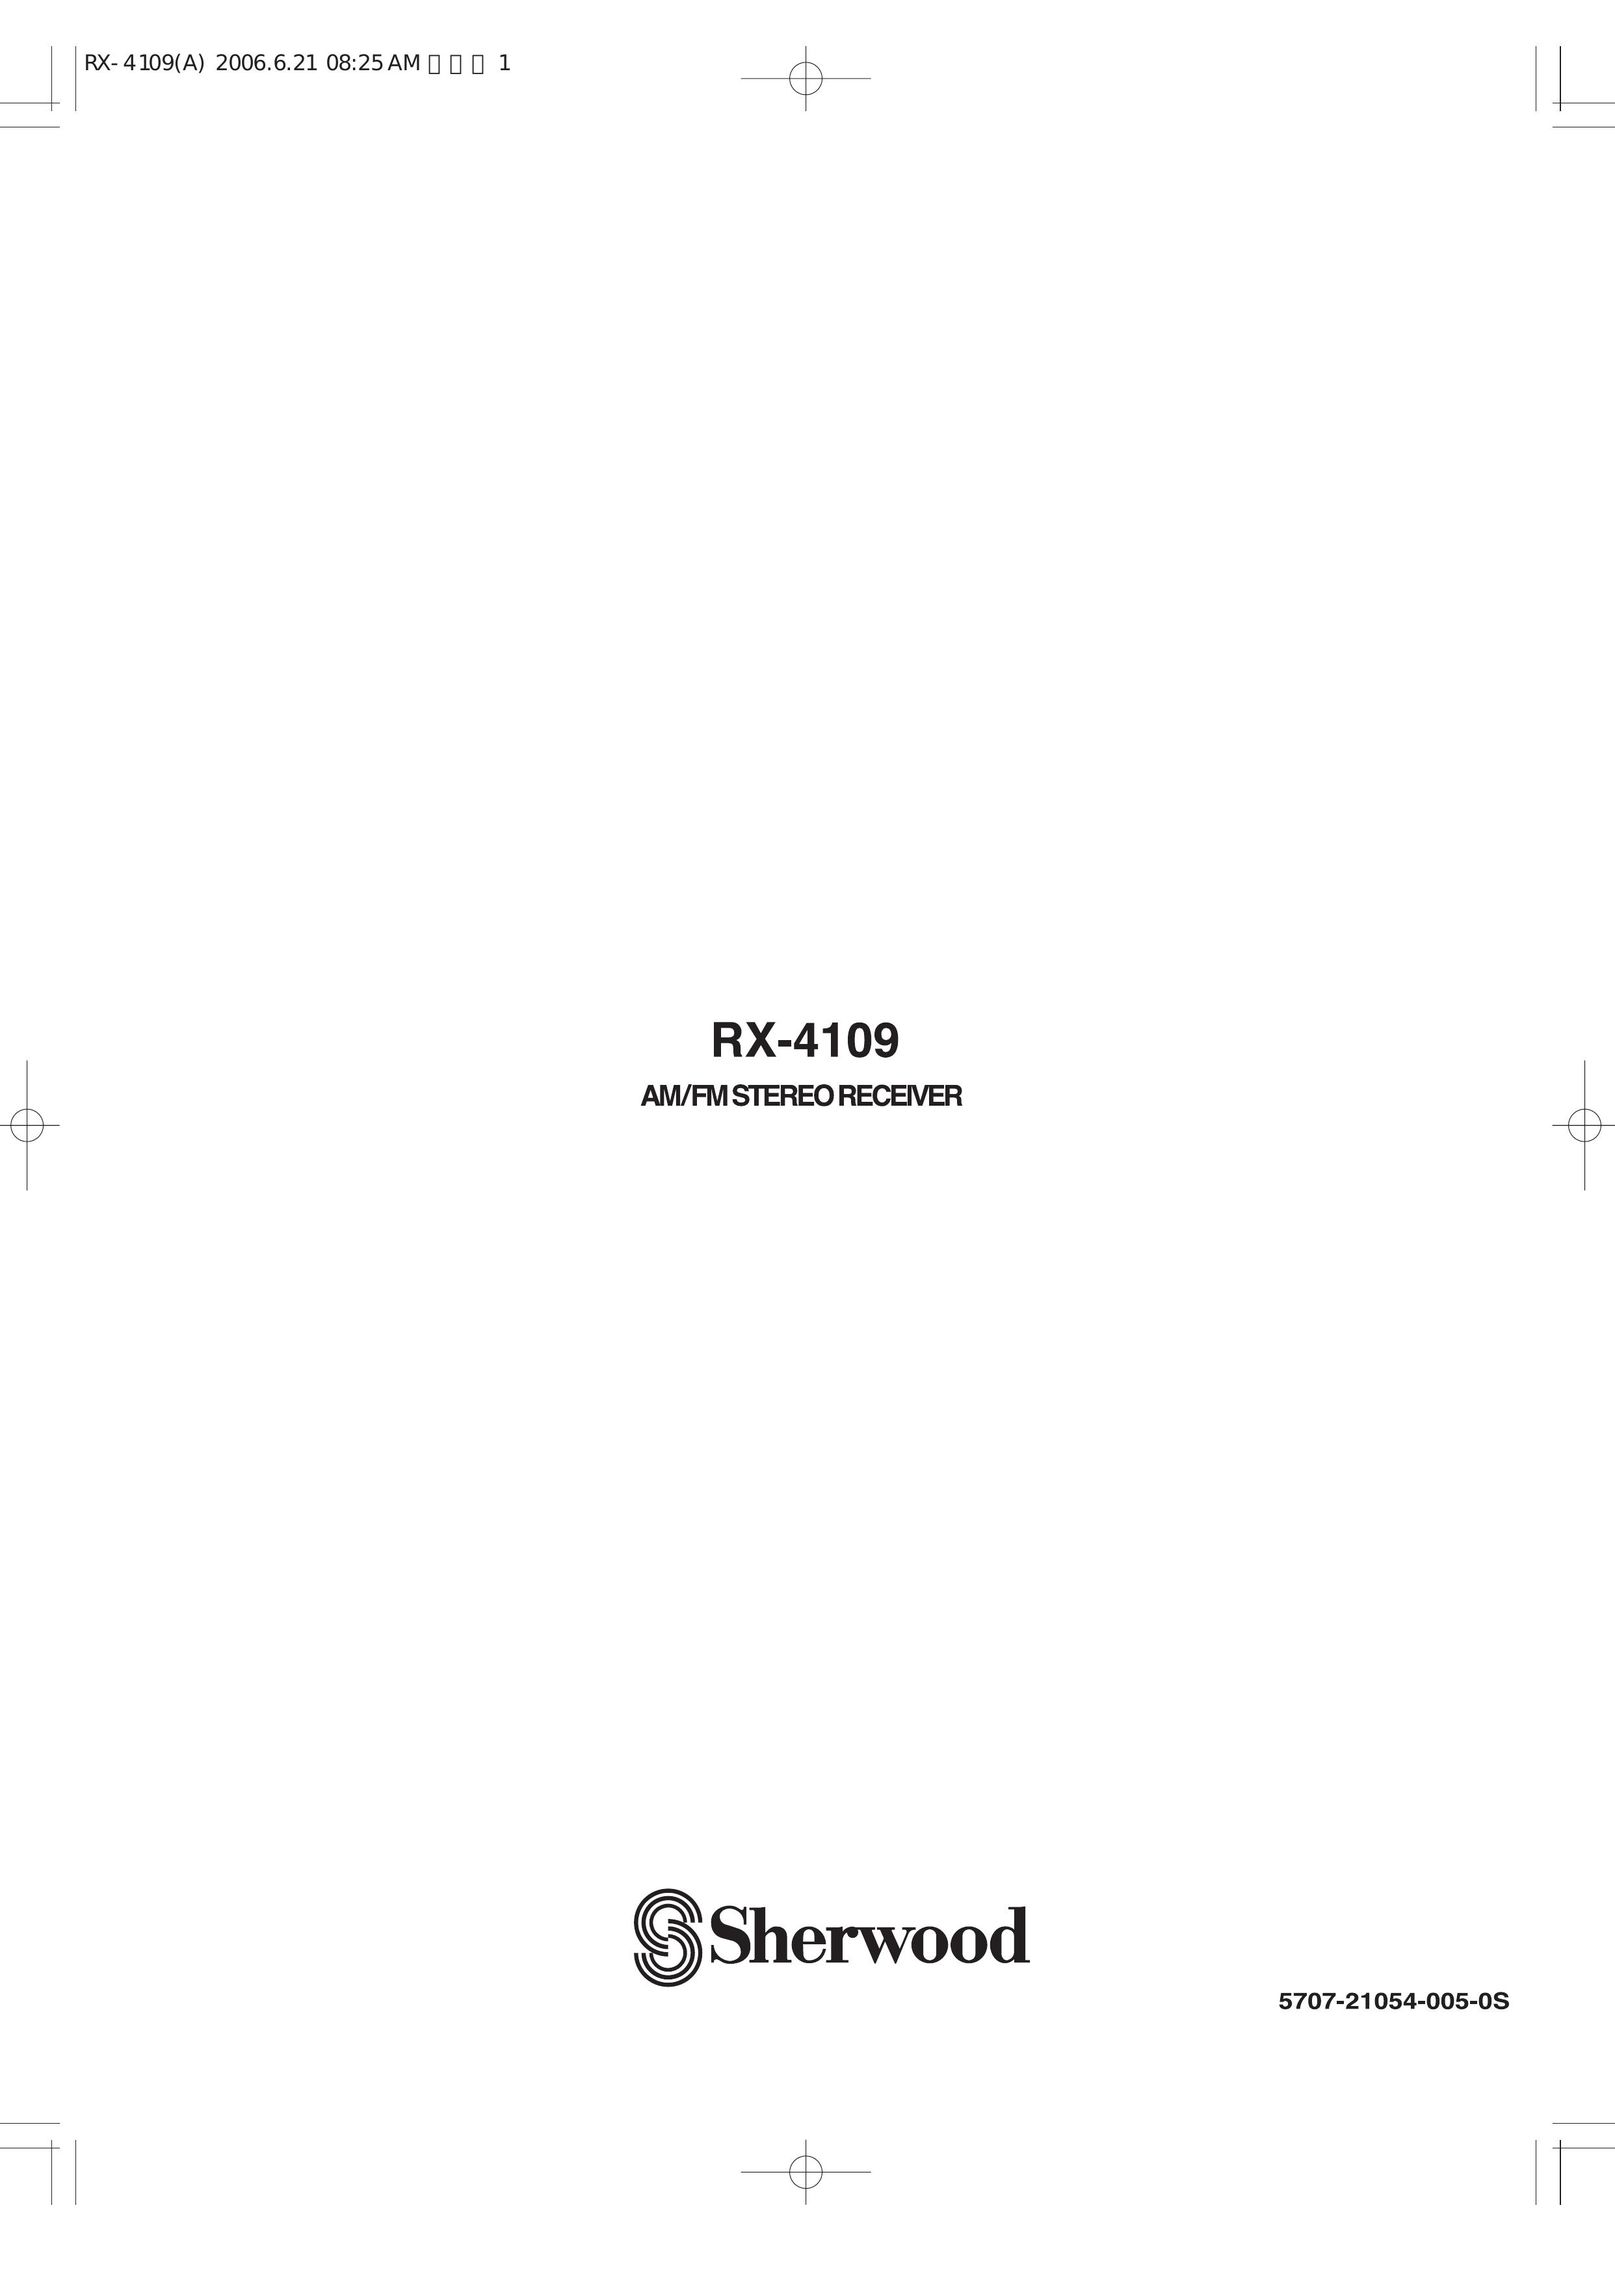 Sherwood RX-4109 Stereo Receiver User Manual